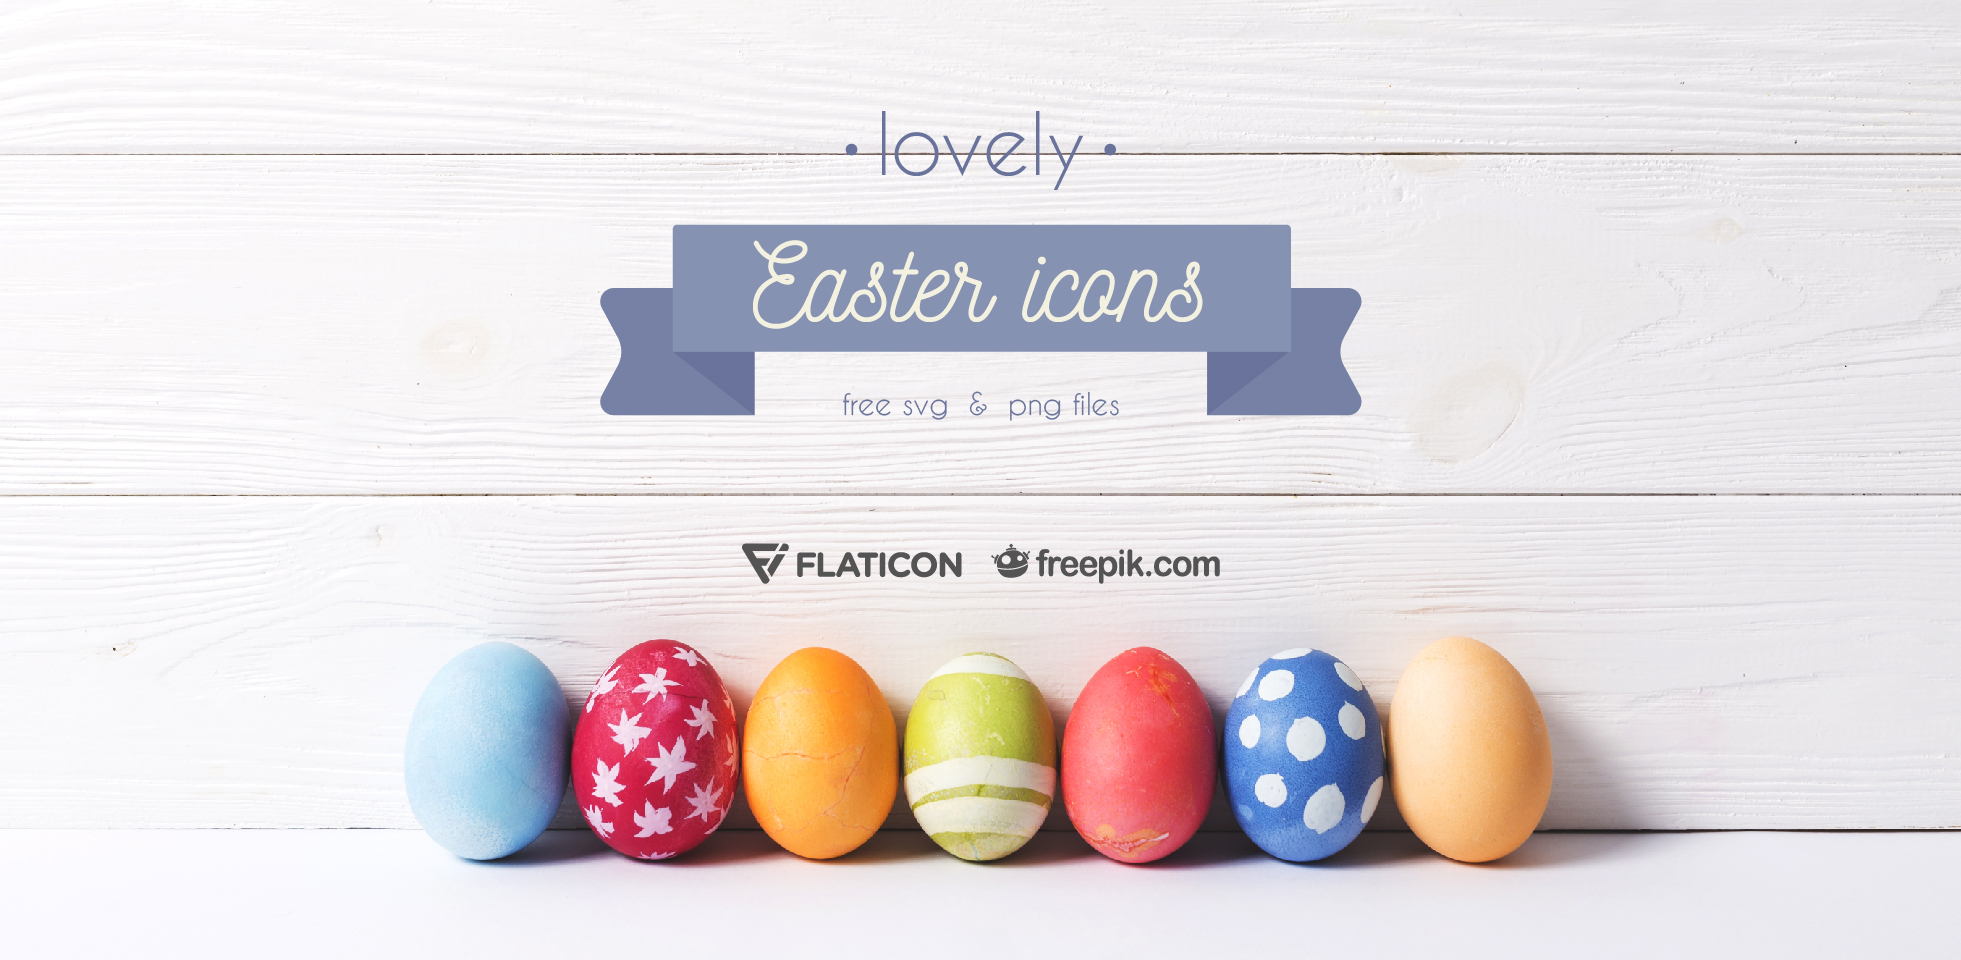 Free Download: Easter Icons